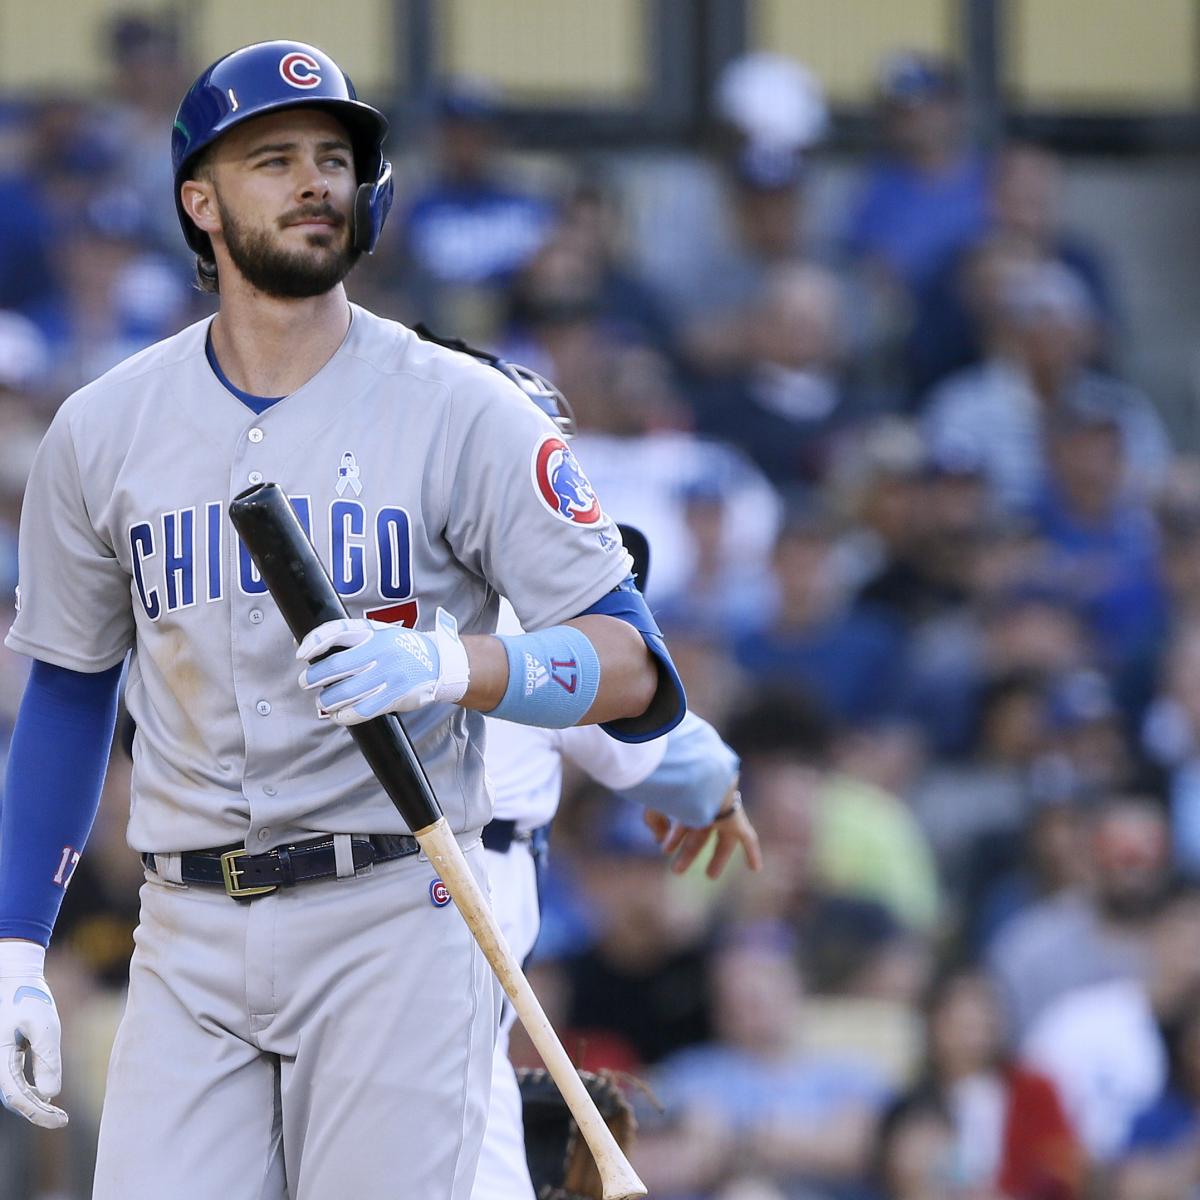 Kris Bryant and the Chicago Cubs Haven't Hit in the MLB Playoffs